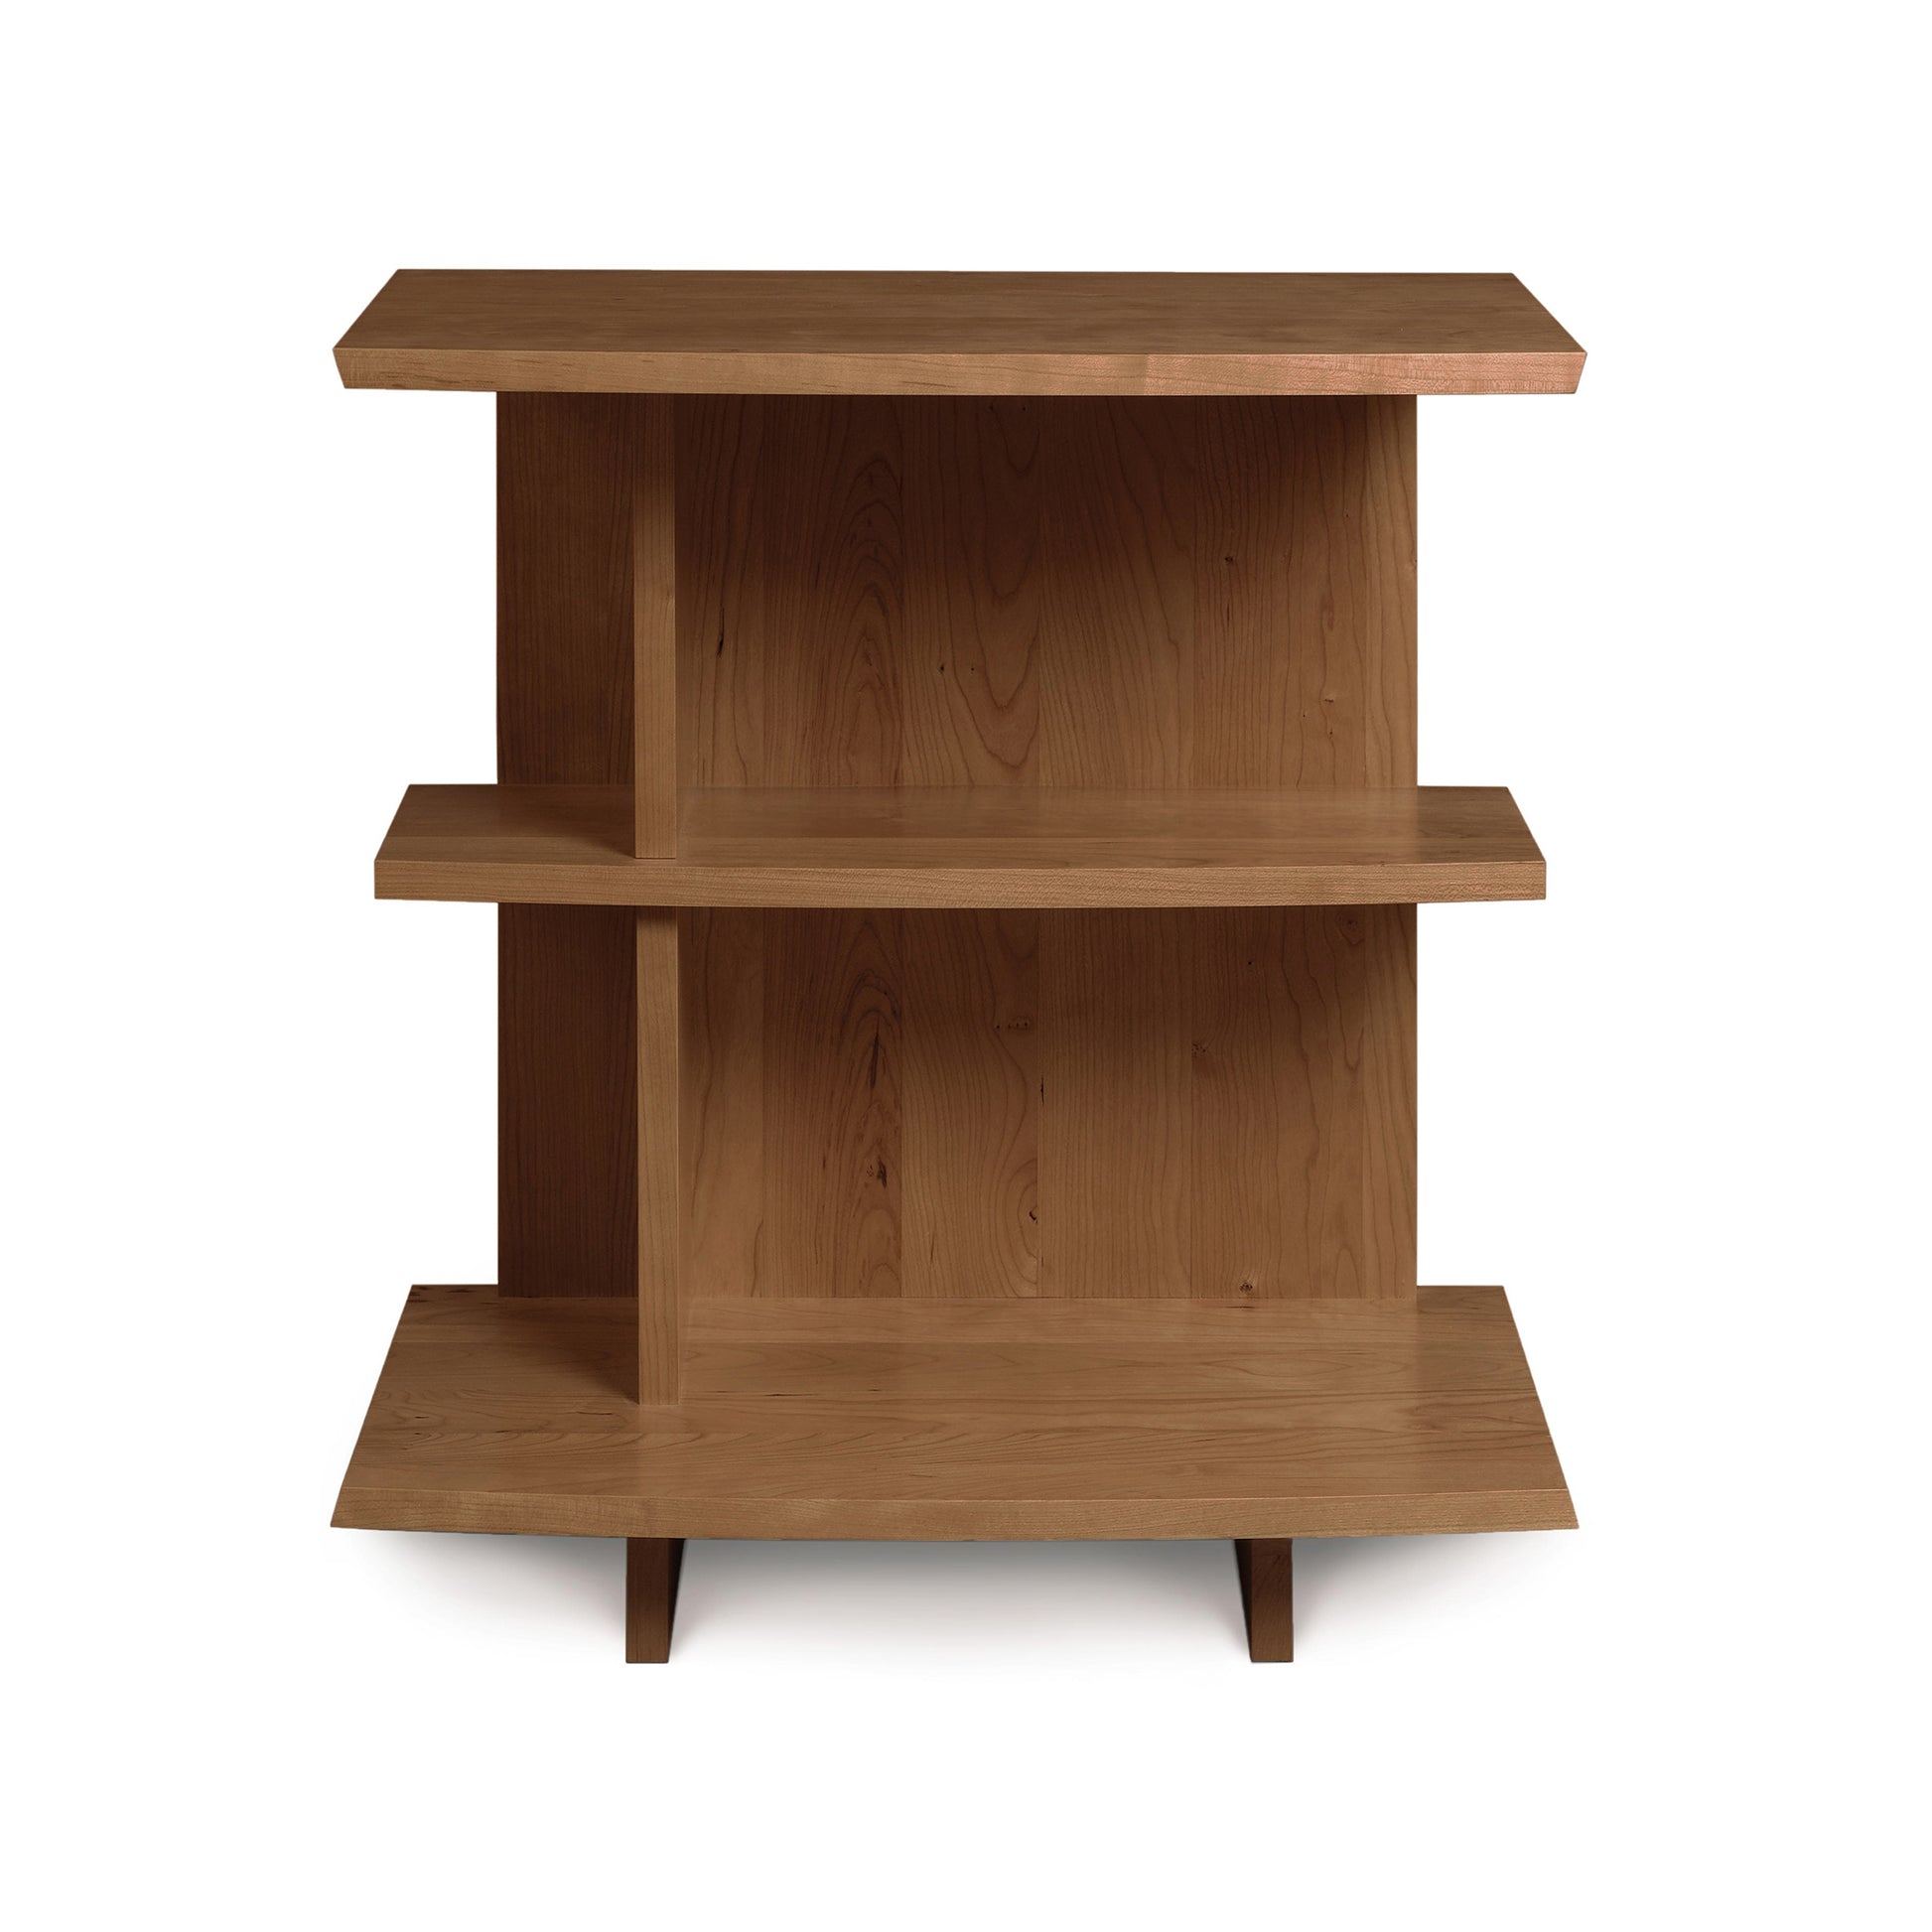 A Berkeley Open Shelf Nightstand - Left by Copeland Furniture, made of solid wood cherry, with two shelves.